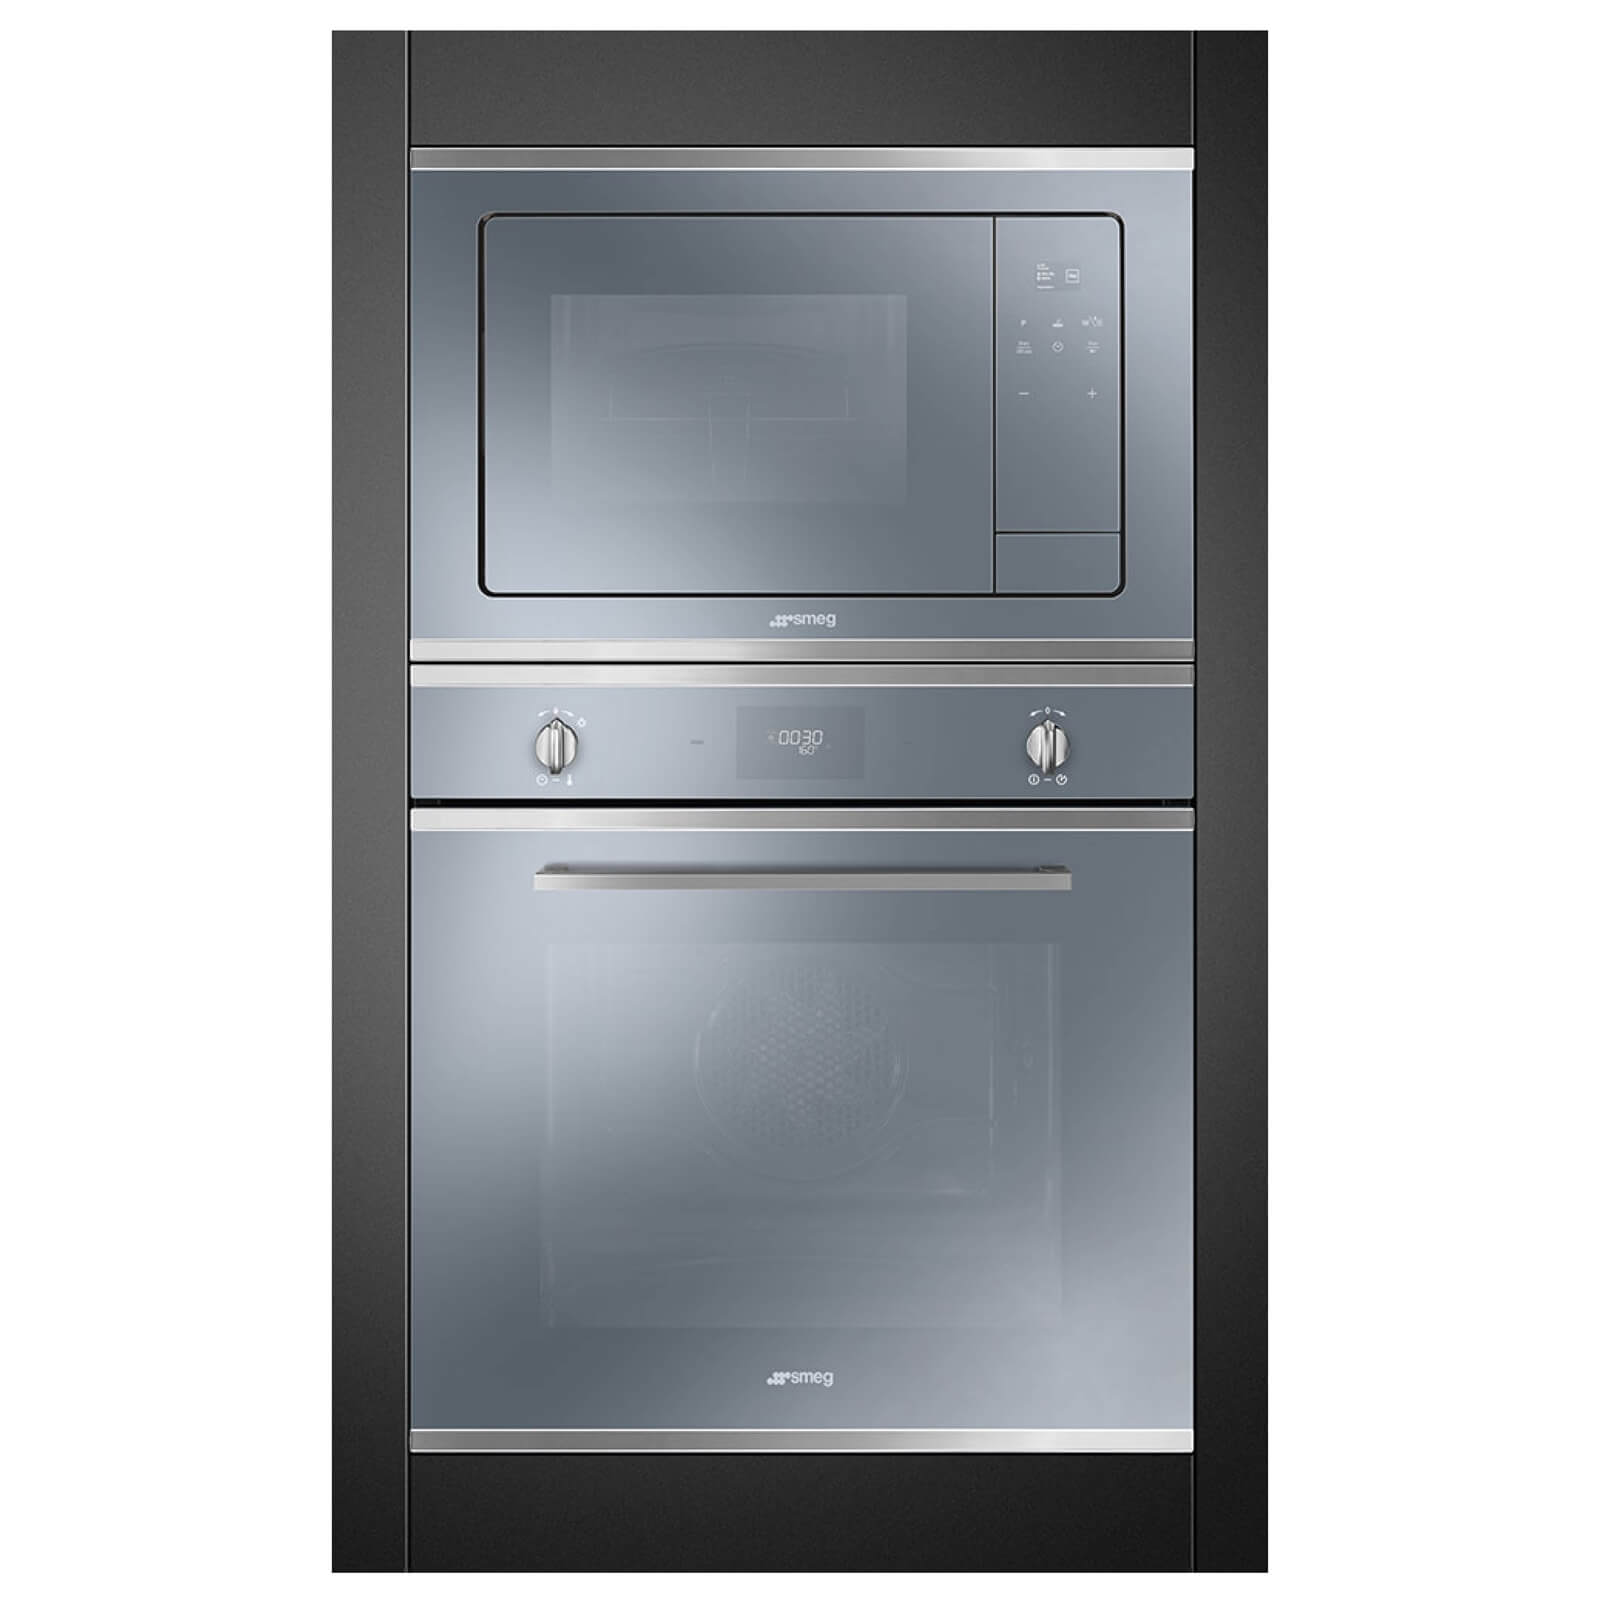 Smeg FMI420S Cucina Silver Glass Built-in Microwave Oven with Grill complete with Frame - 20 litres